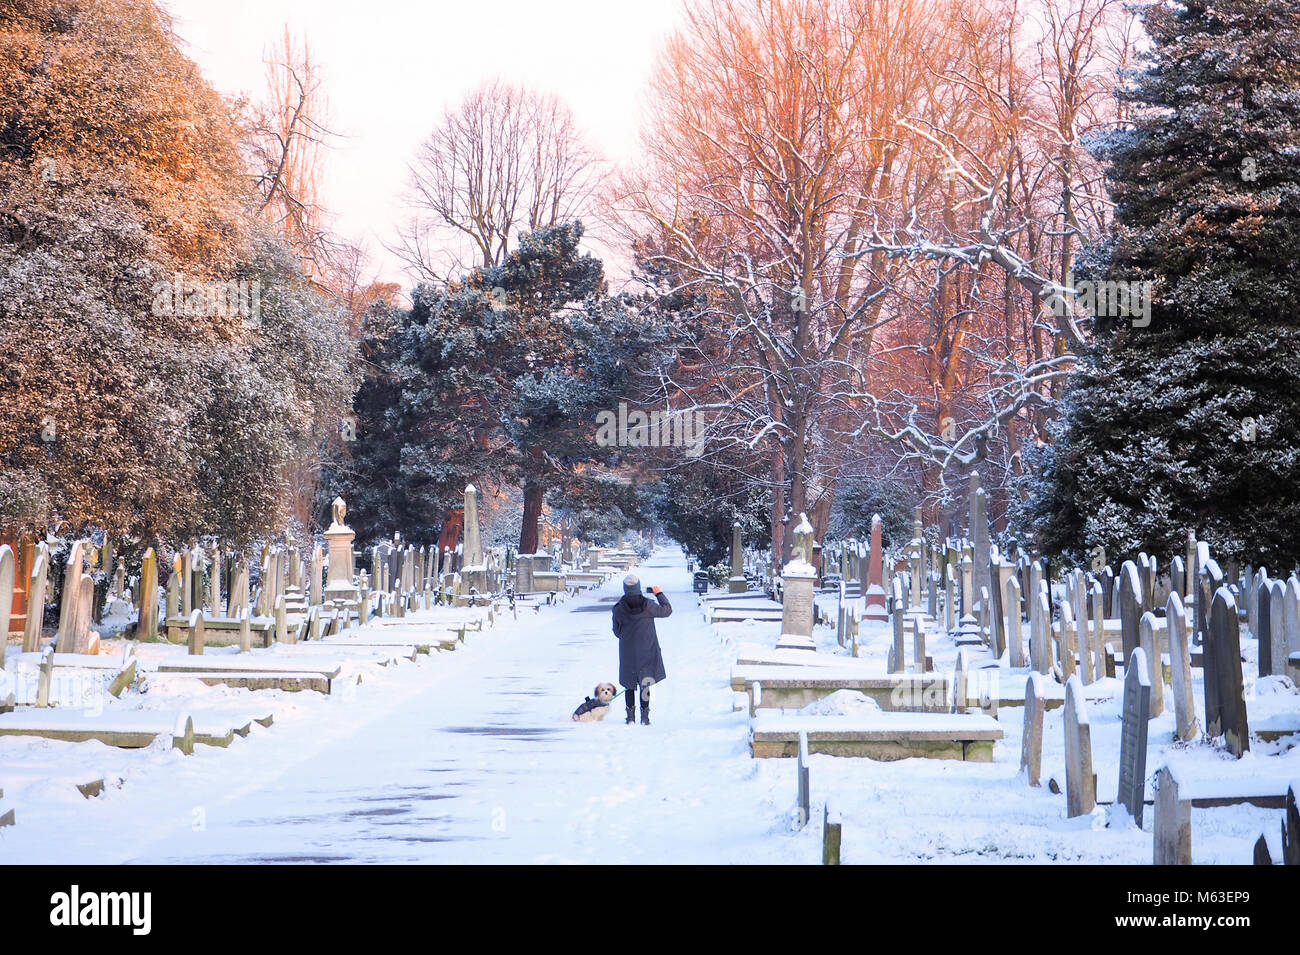 London, UK. 28th Feb, 2018. UK Weather: Central London was blanketed in snow as the cold weather front swept across South East England.A woman takes a photo in Brompton Cemetery © Brian Minkoff / Alamy Live News Stock Photo